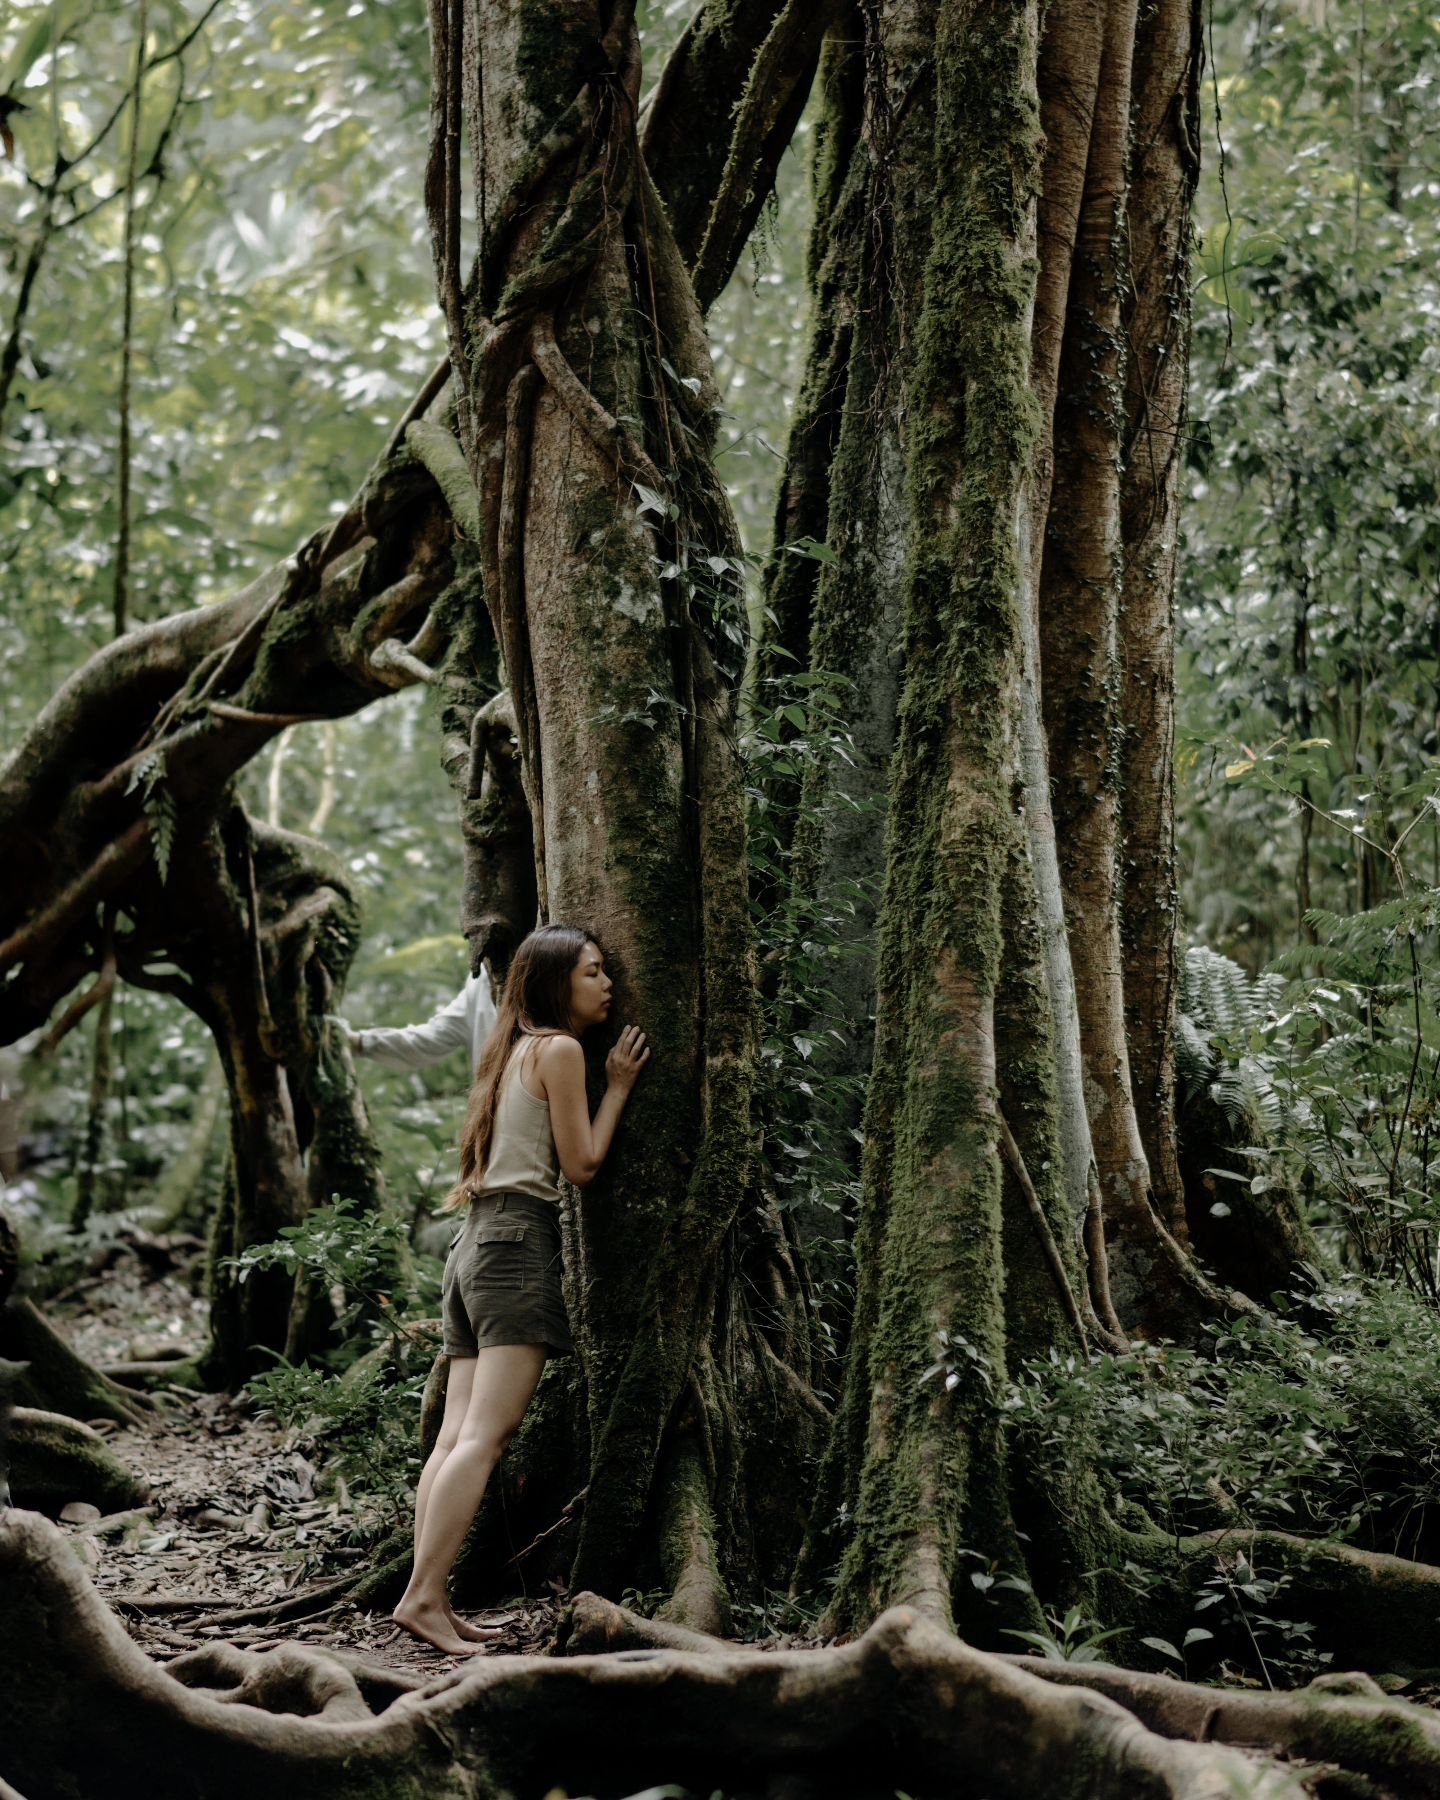 𝗧𝗿𝗲𝗲𝘀' 𝗦𝗽𝗲𝗮𝗸 |  Trees are very quiet and subtle nature beings. They are wise, observe mostly, and speak little. They don't have a spoken voice like humans or animals do, yet we can't deny that they have a strong presence.

If we walk around